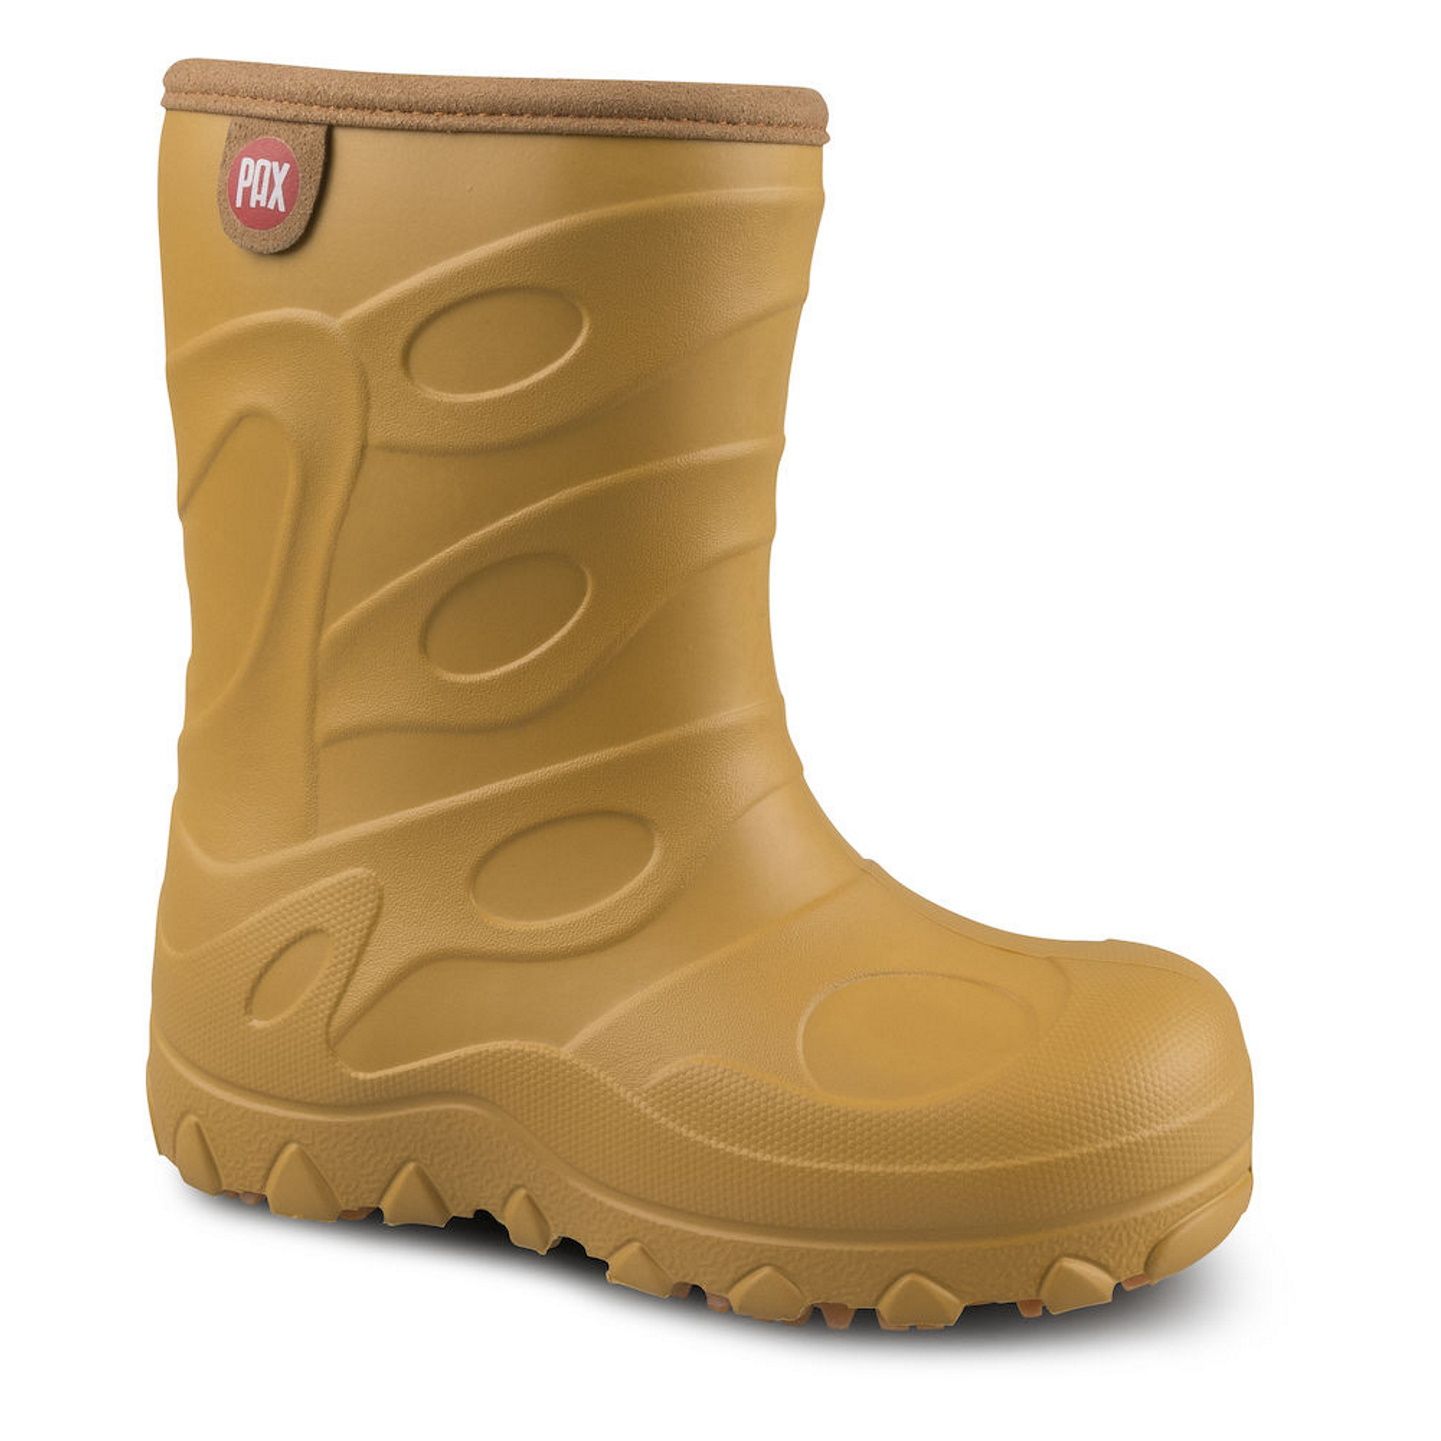 Pax Kids' Inso Rubber Boot Sunflower